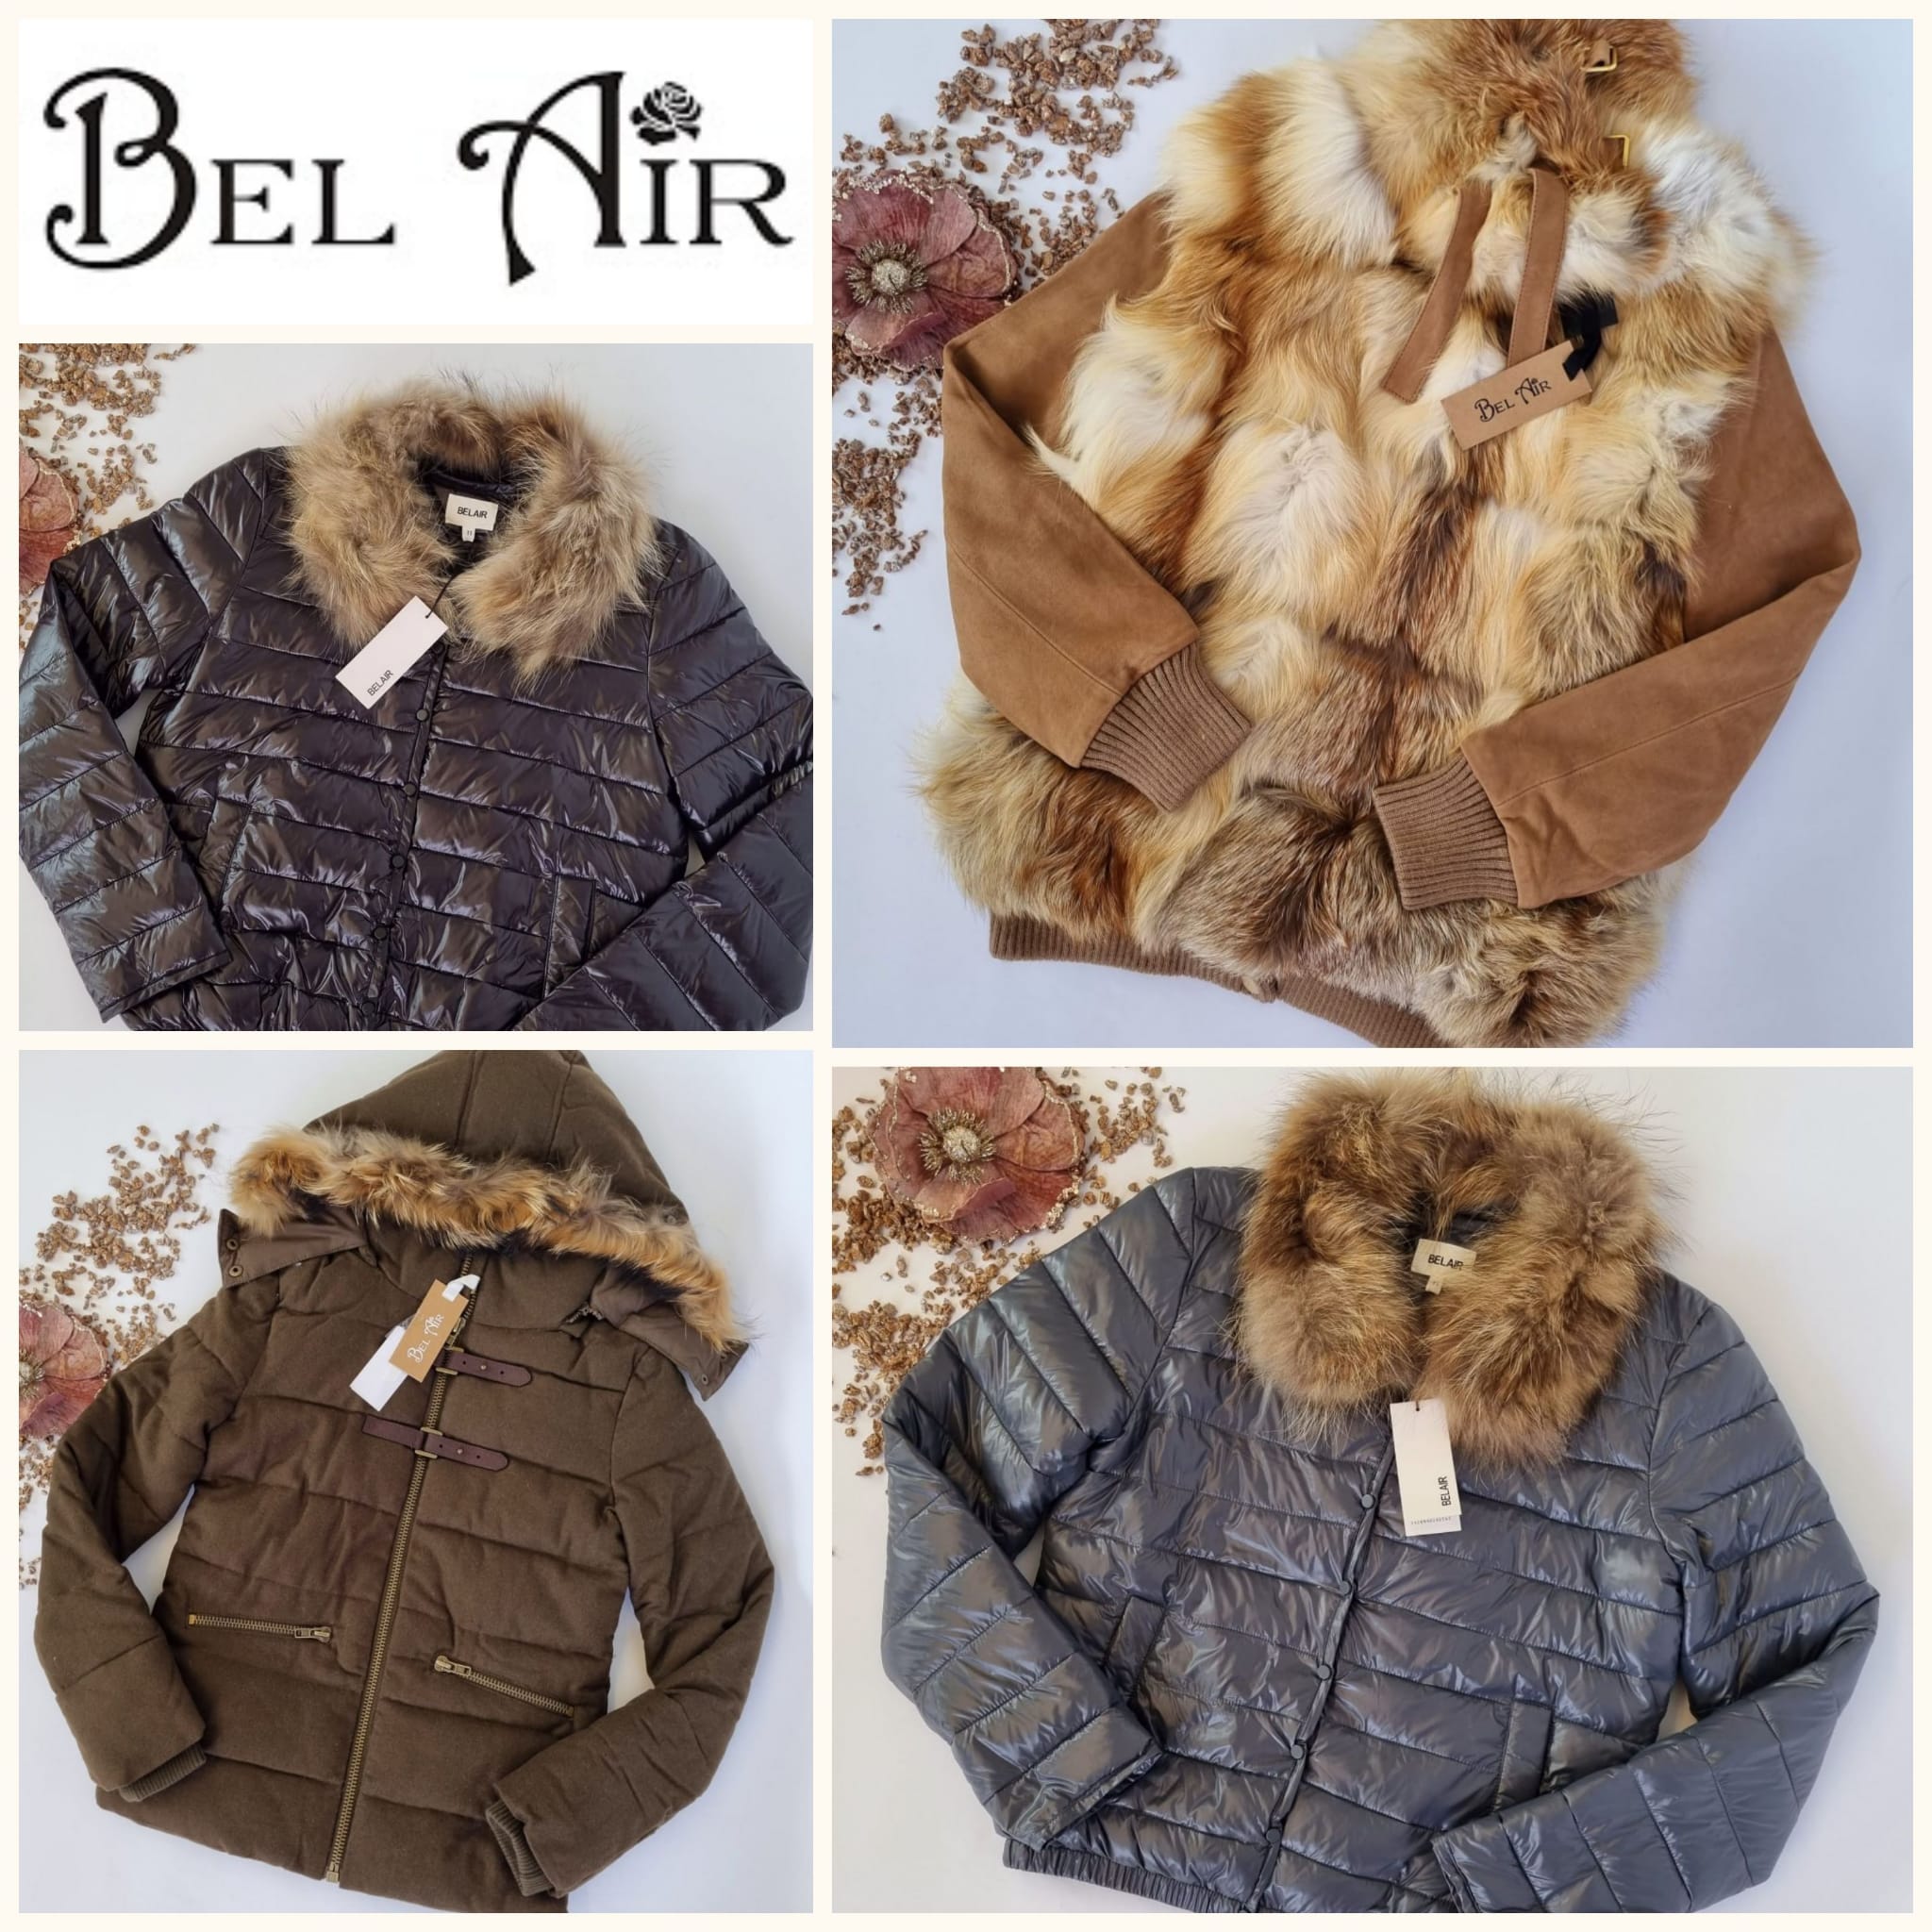 Our prices are the bomb!!! Mix of women's jackets from BELAIR